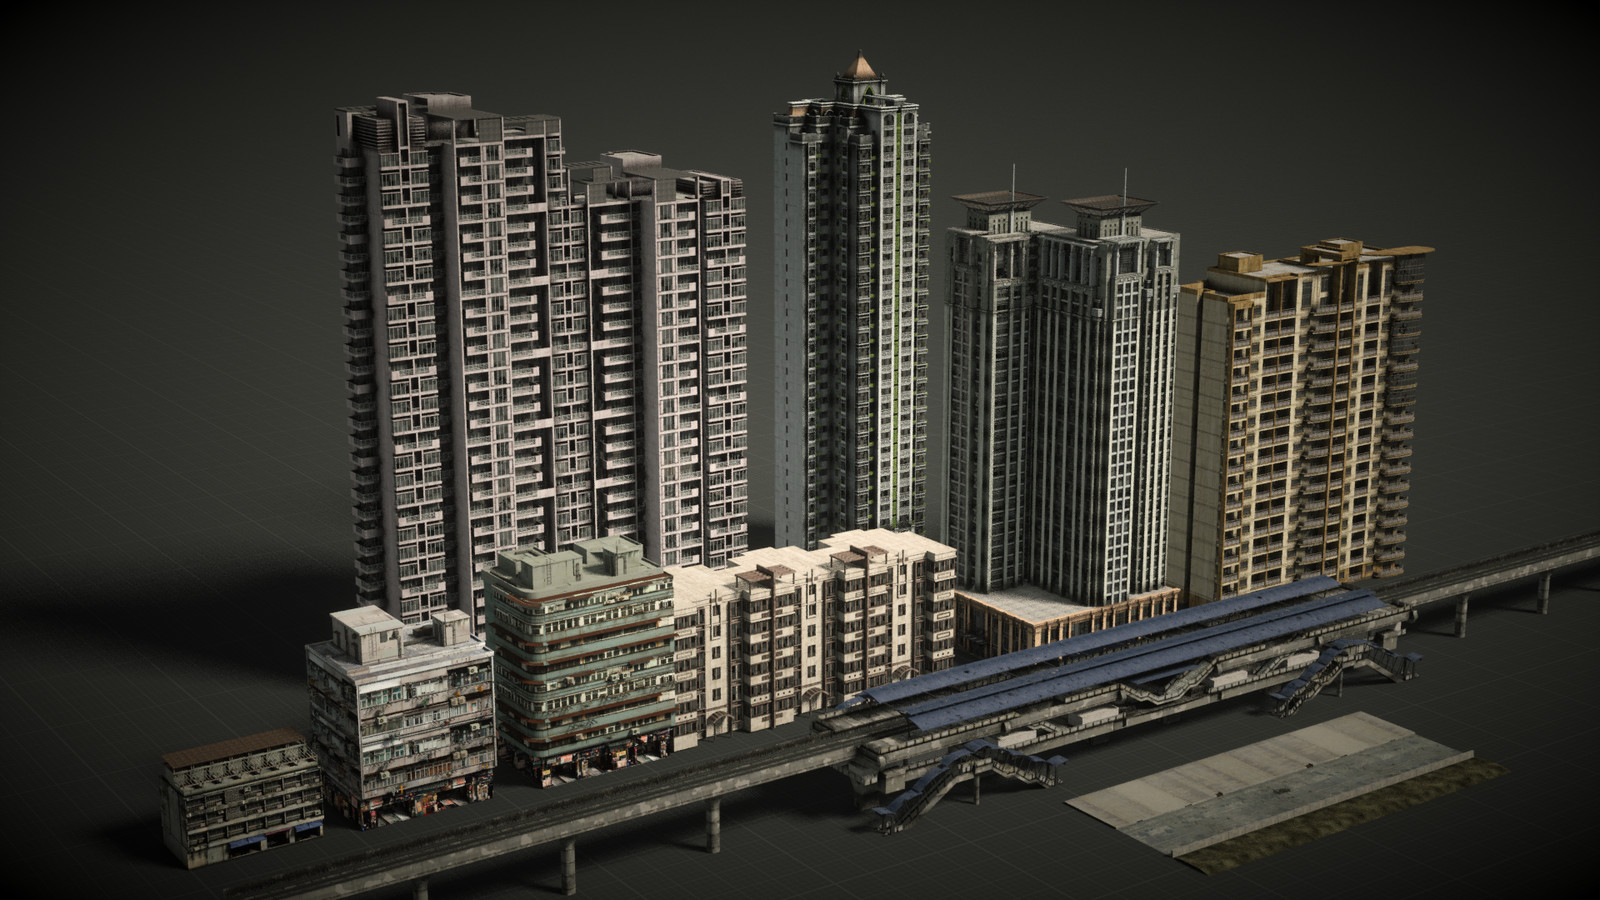 Buildings made myself or from google wharehouse, then textured using procedural shaders